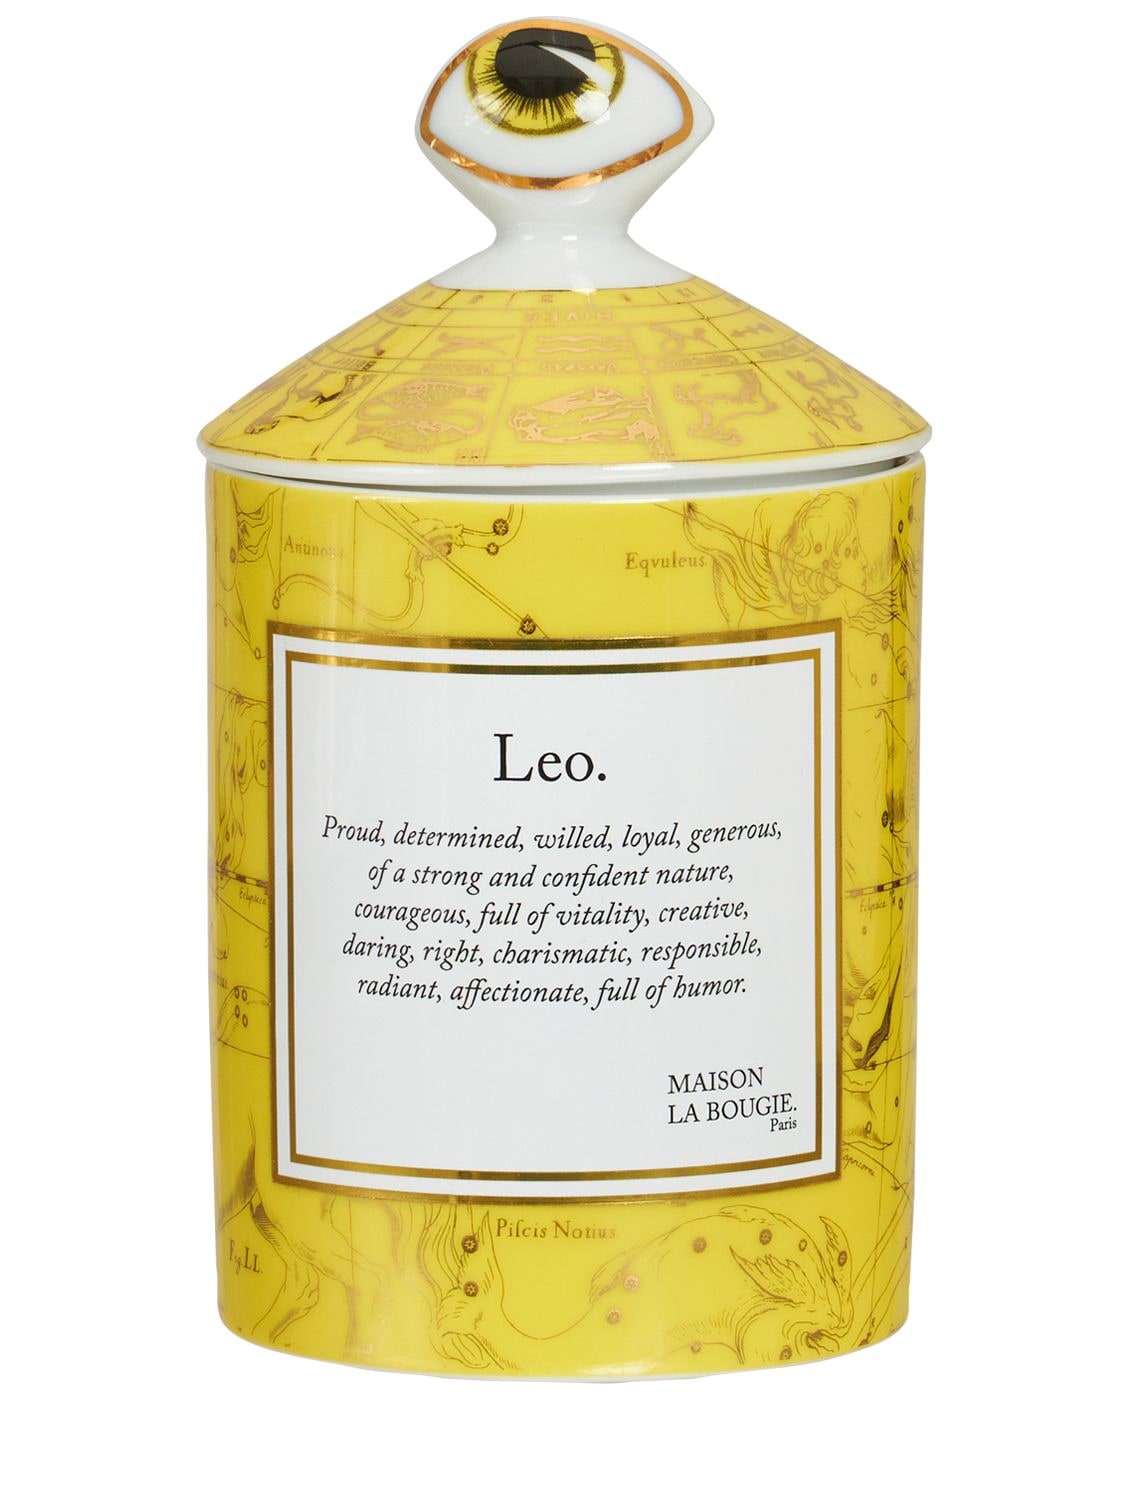 Maison La Bougie 350gr Leo Zodiac Scented Candle In Yellow